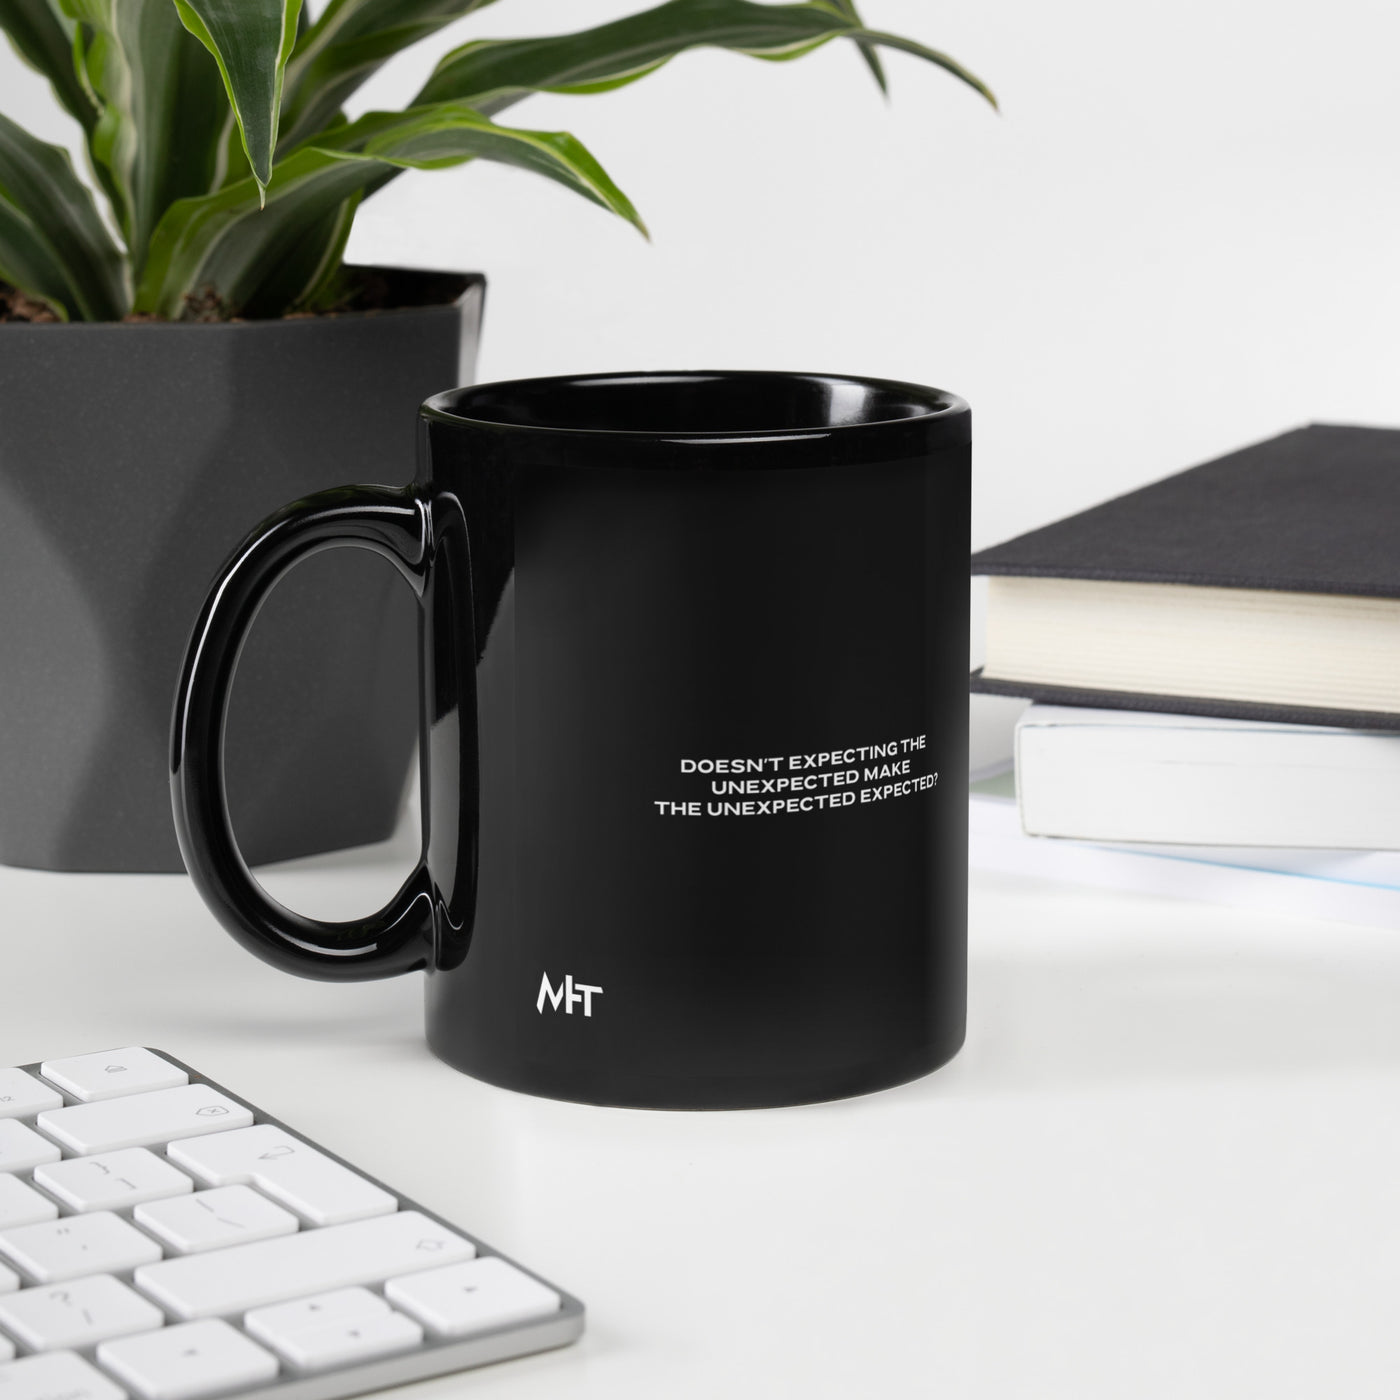 Doesn't expecting the unexpected make the unexpected expected V1 - Black Glossy Mug